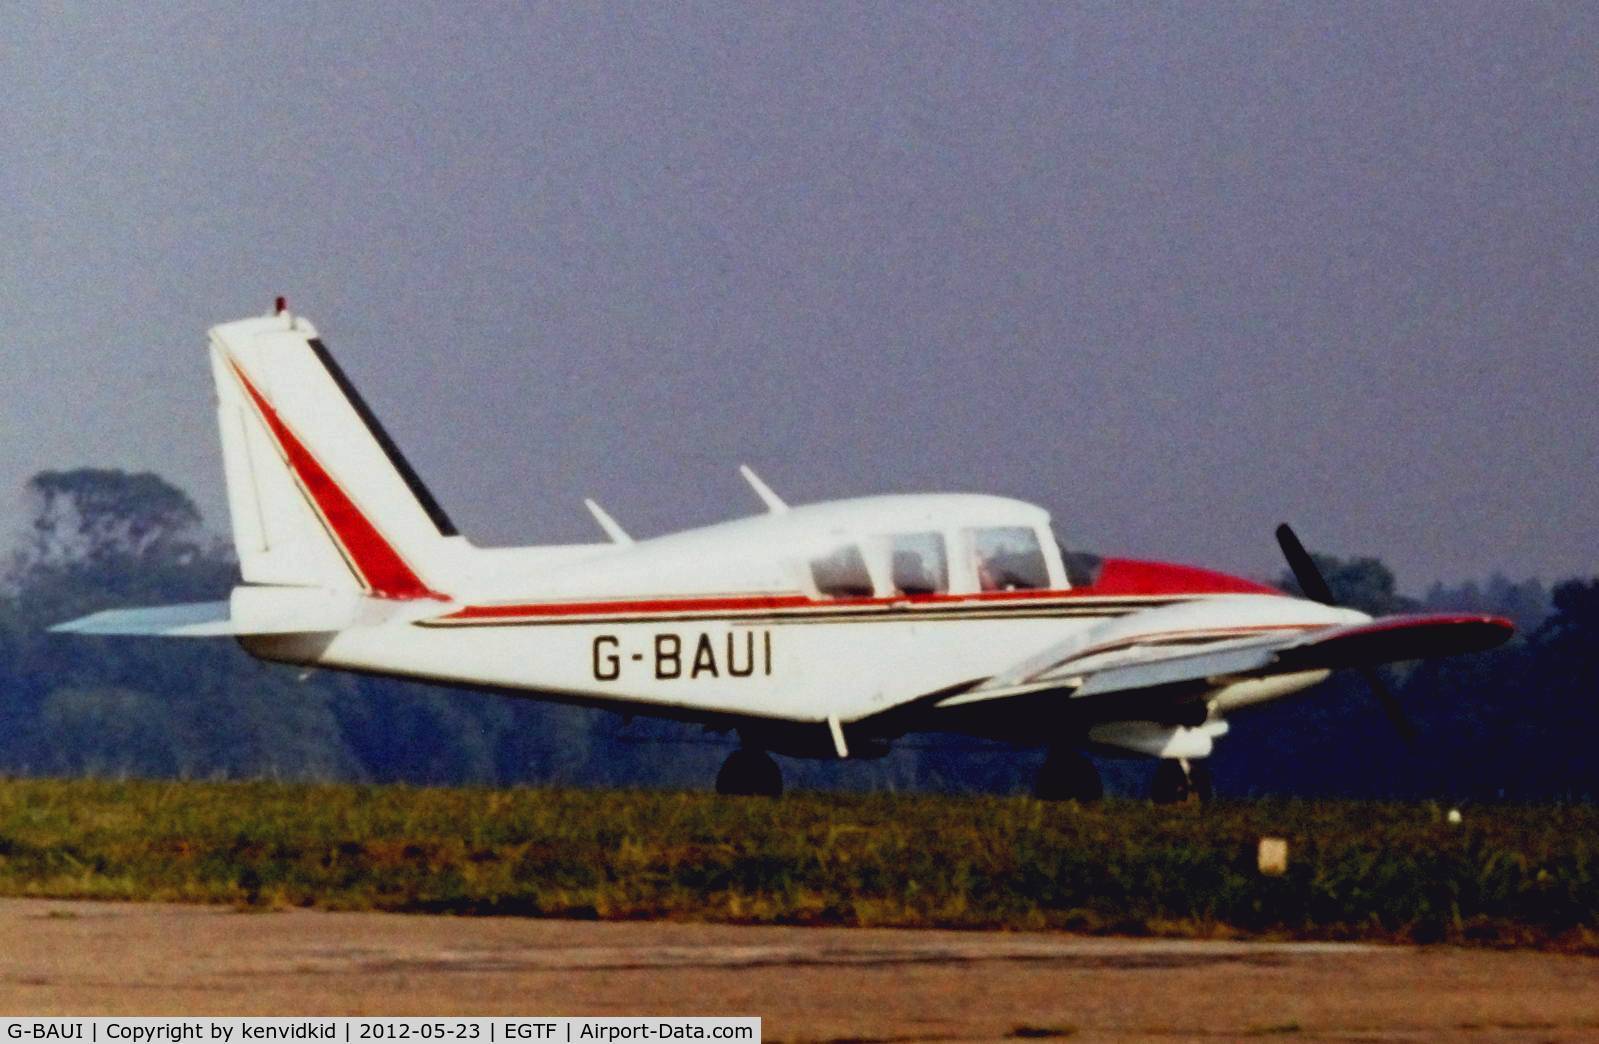 G-BAUI, 1969 Piper PA-23-250 Aztec C/N 27-4335, At Fairoaks in the mid 1970's.
Copied from slide.